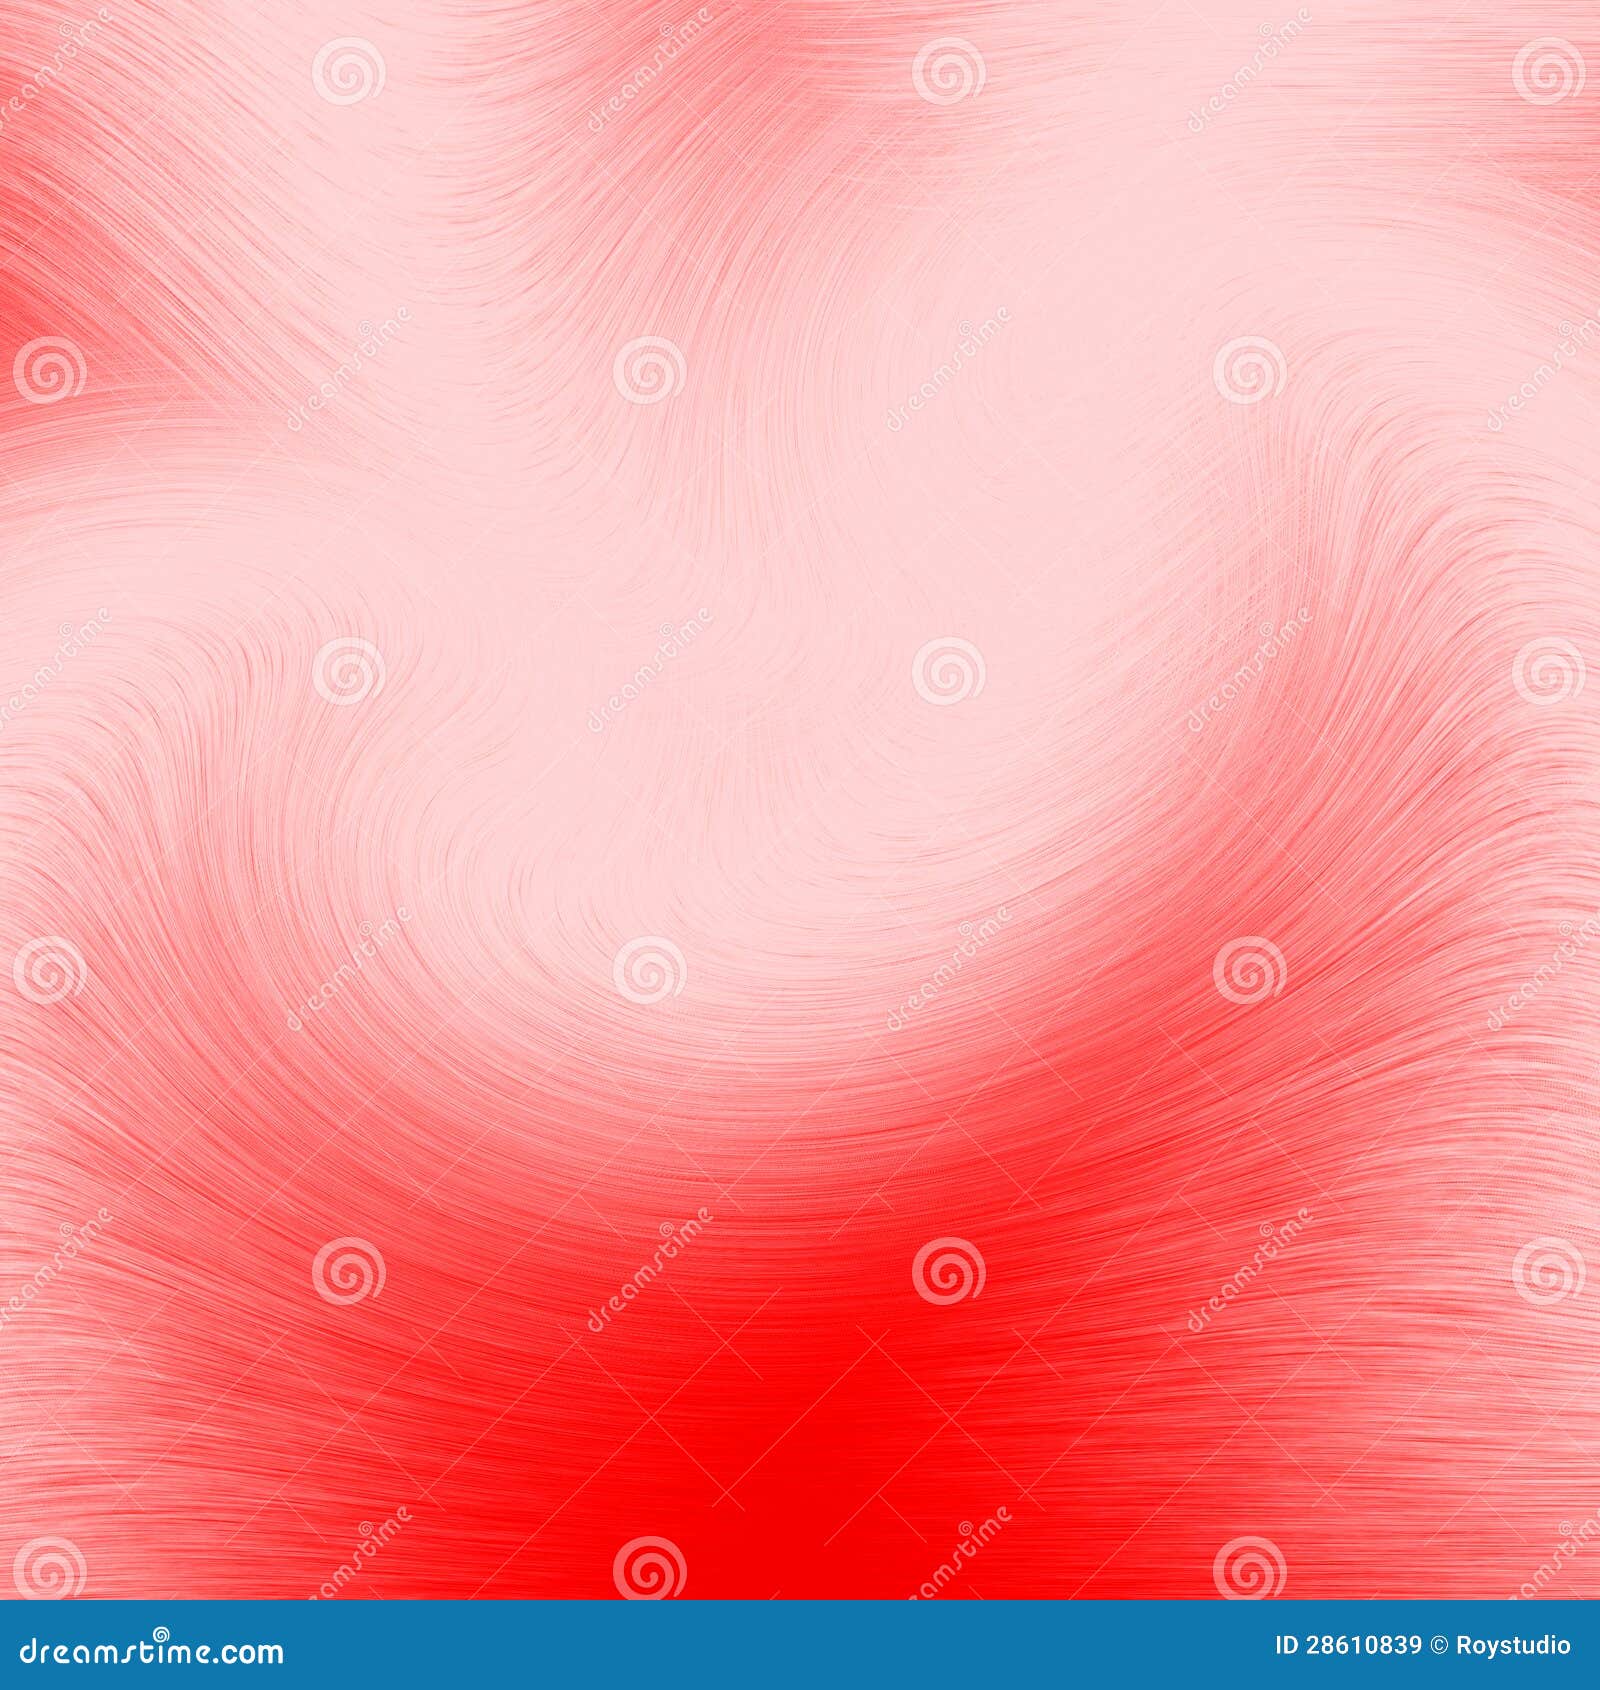 Bright Red Abstract Background Texture May Use As Greeting Card or Poster  Template Stock Image - Image of smooth, greeting: 28610839